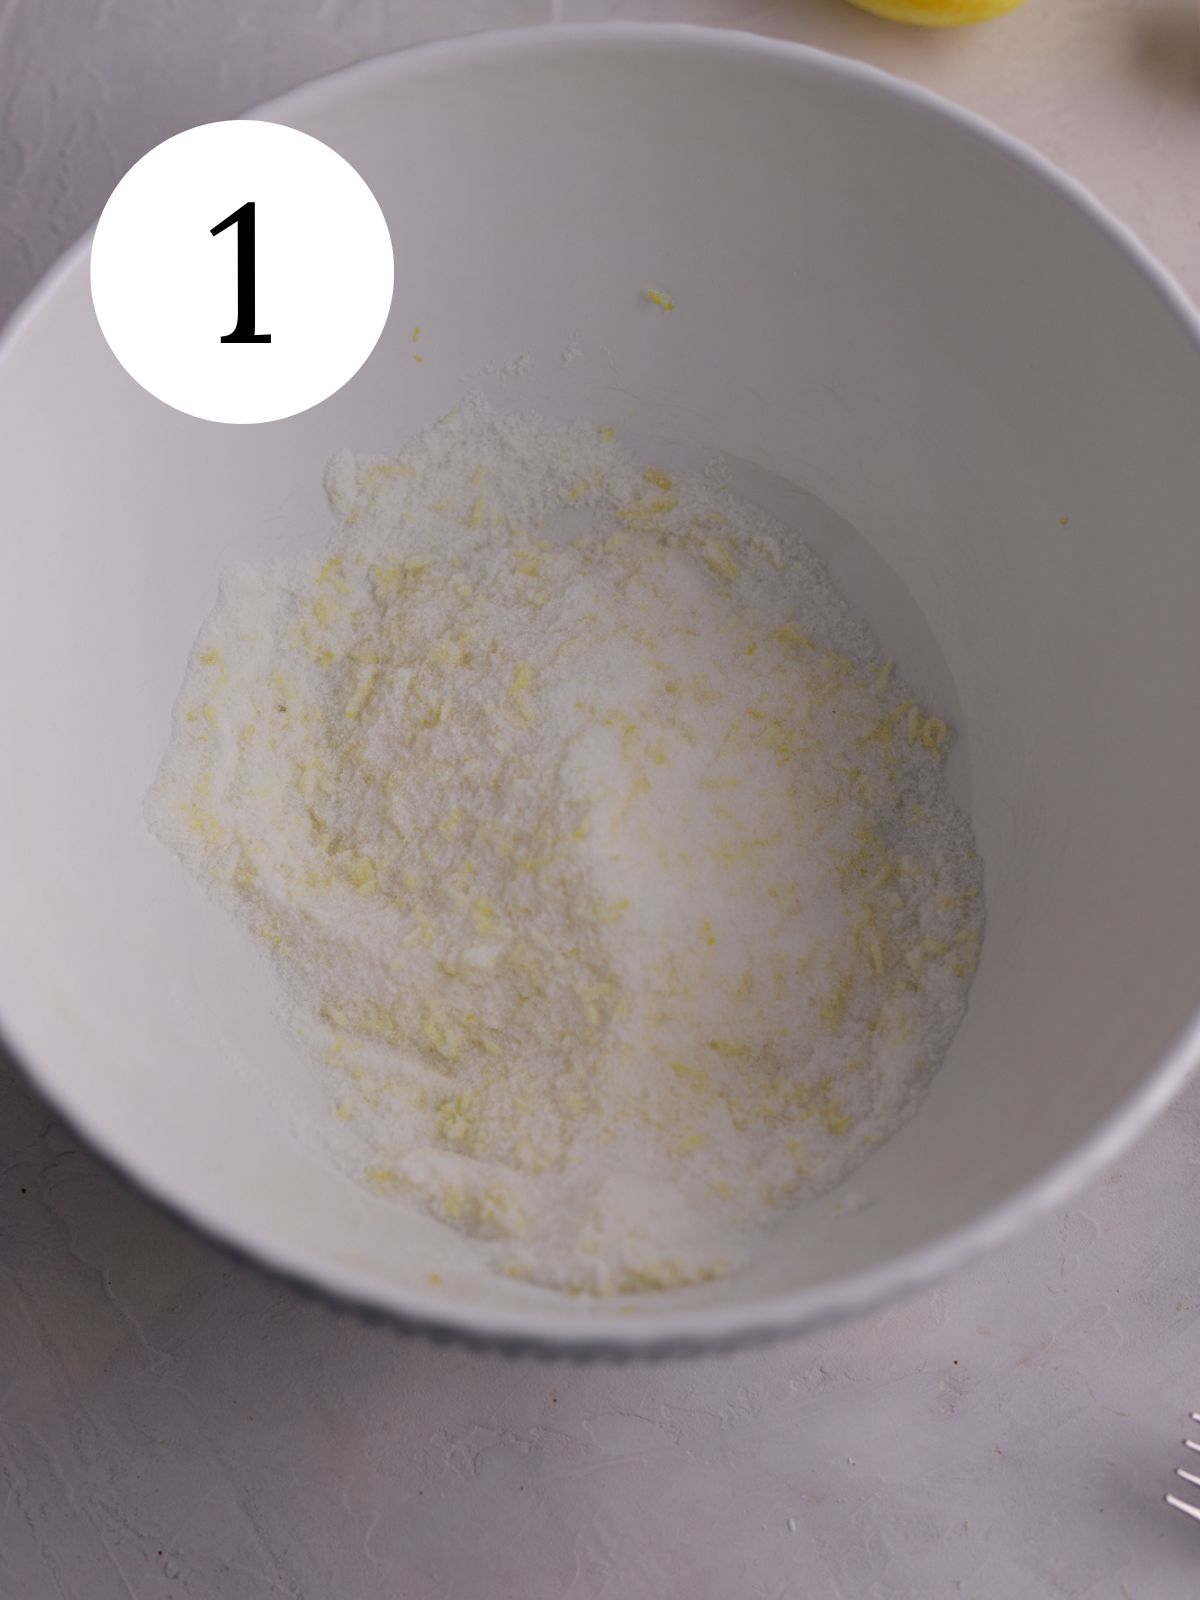 Sugar mixed together with lemon zest in a white mixing bowl. 